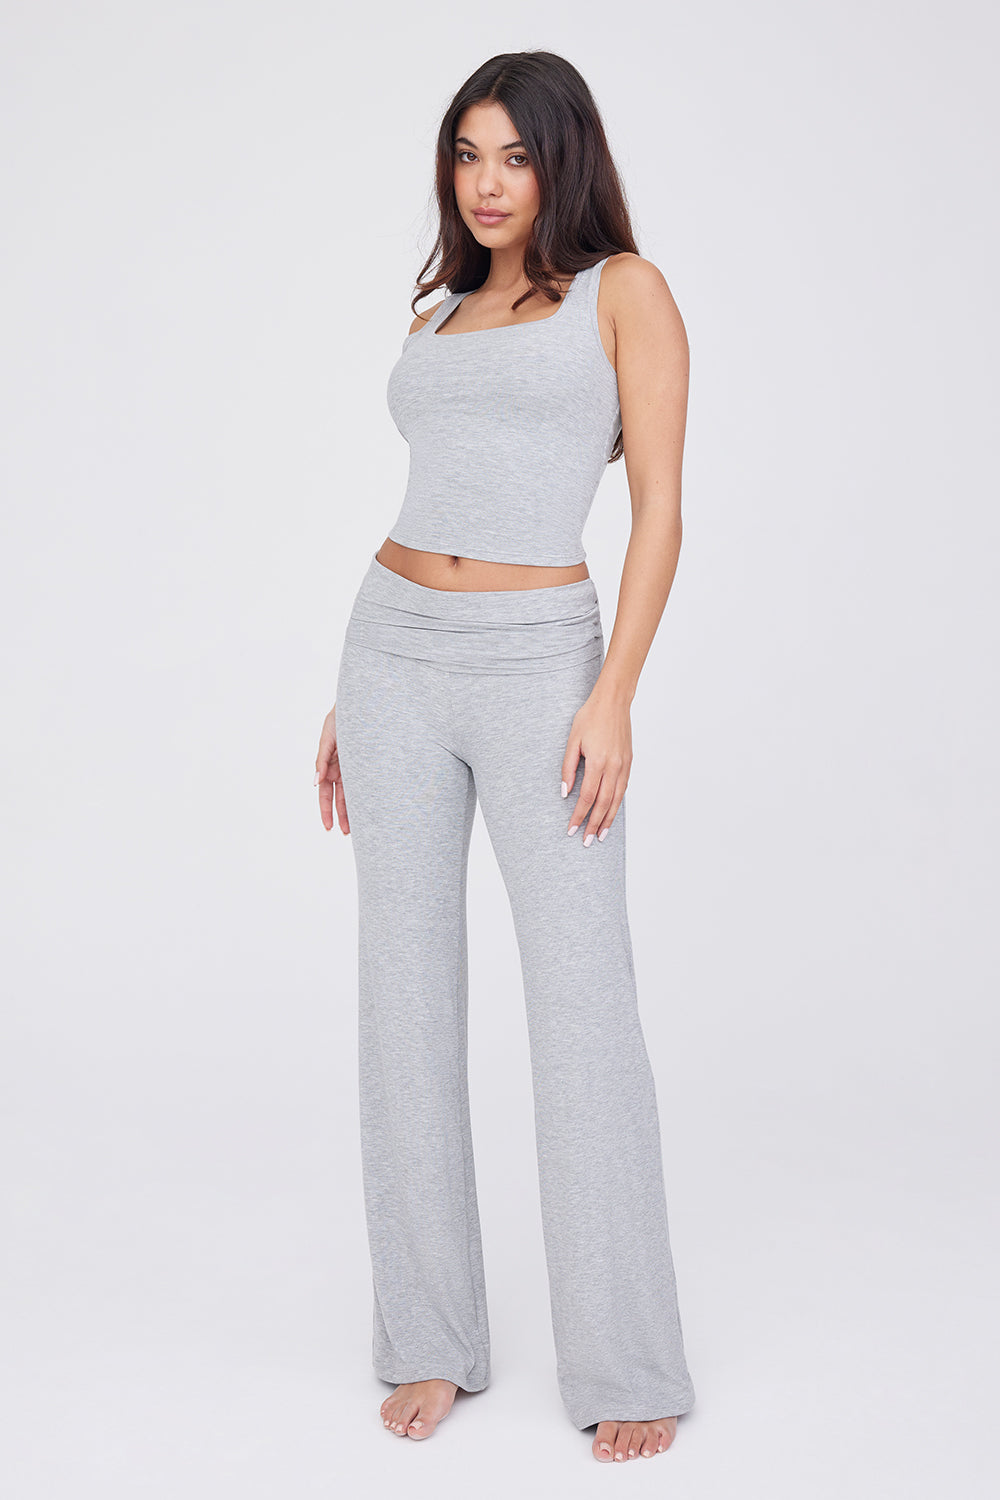 Grey Basic Cotton Blend Flared Trousers  Flared pants outfit, Flares  outfit, Outfits with leggings